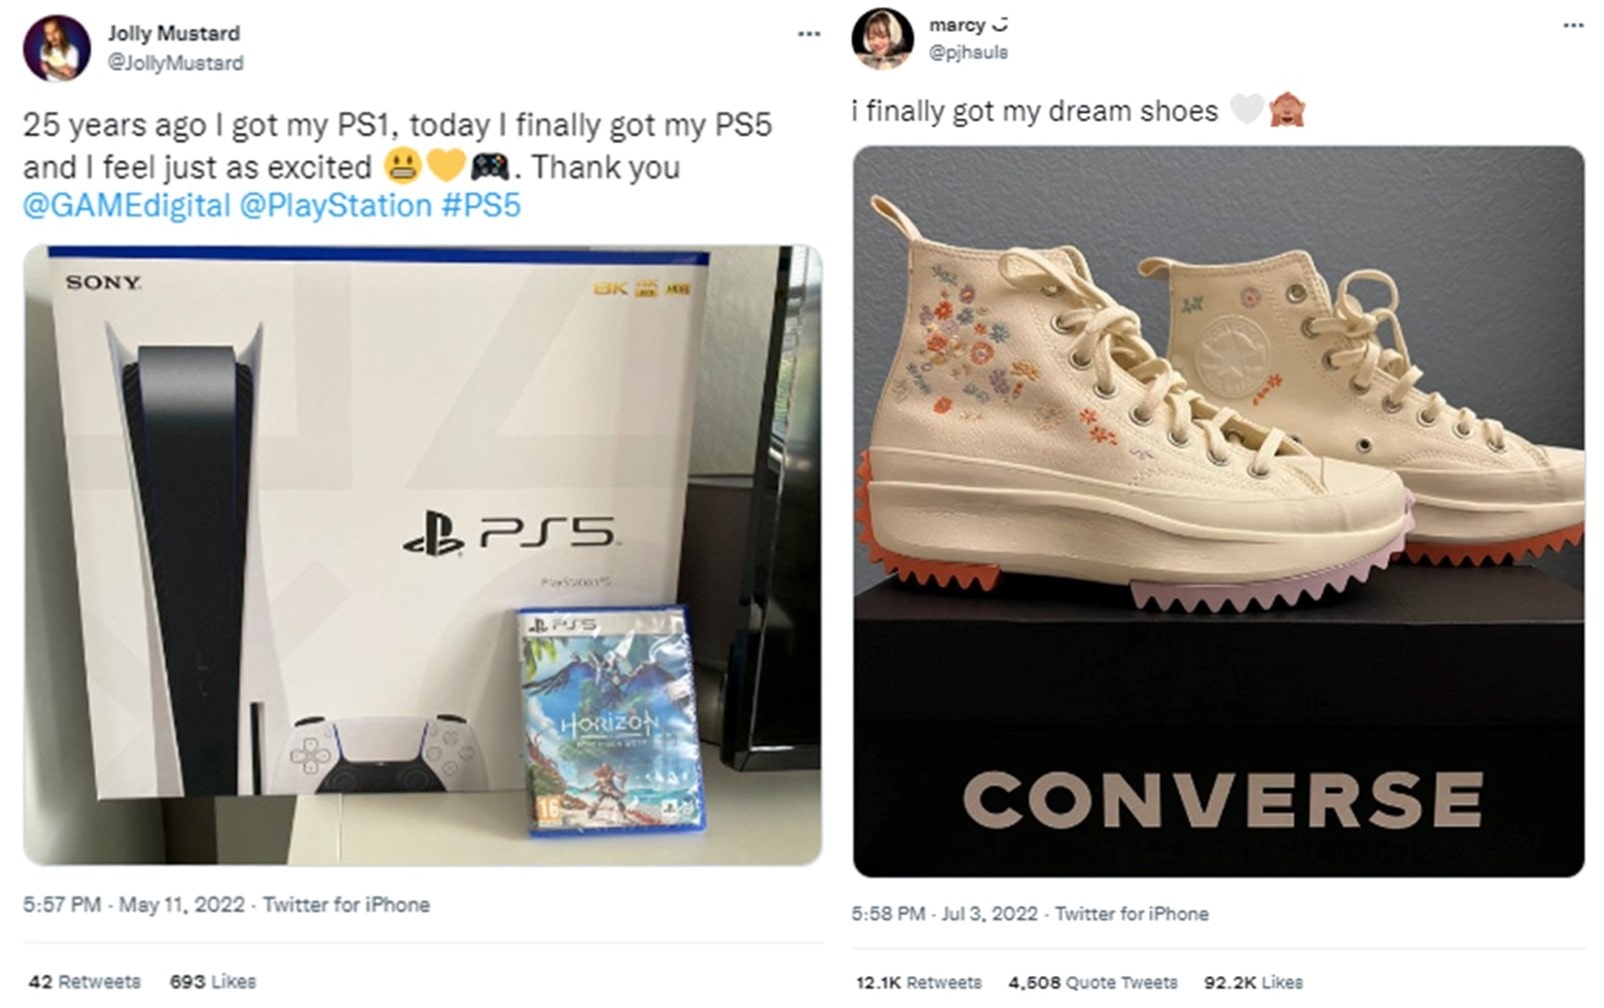 Two excited tweets about people getting highly anticipated products